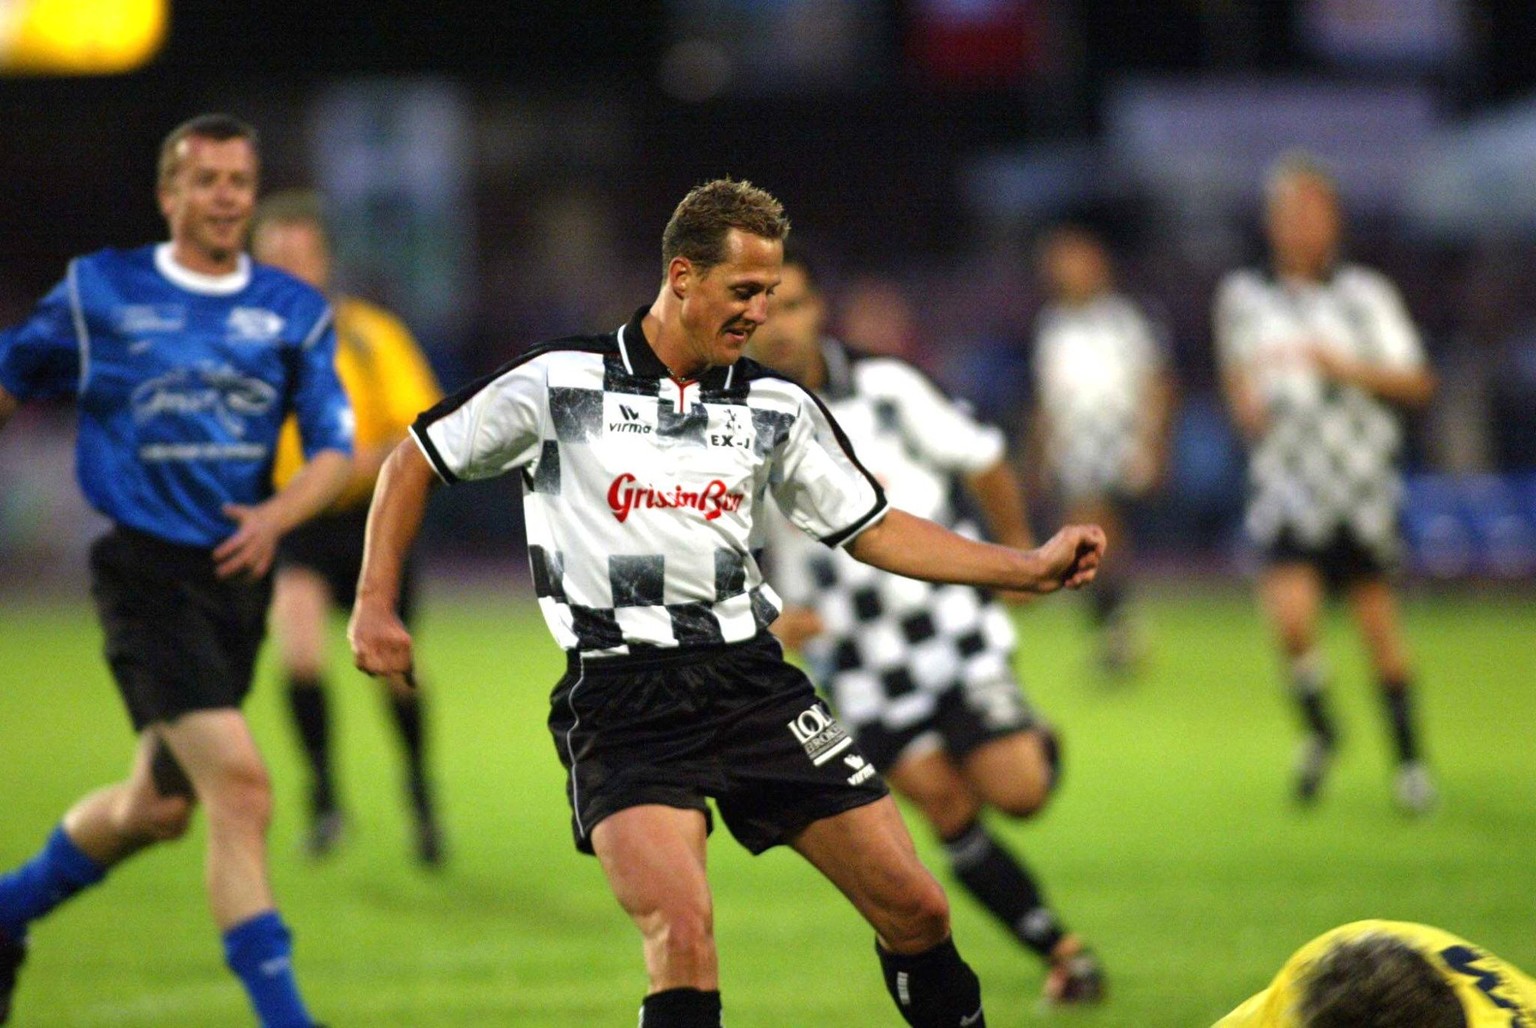 BRU135 - - VERVIERS, BELGIUM: Formula One pilot Michael Schumacher chases the ball during a soccer match for the benefit of children defence association Child Focus, Wednesday 25 August 2004 in Vervie ...